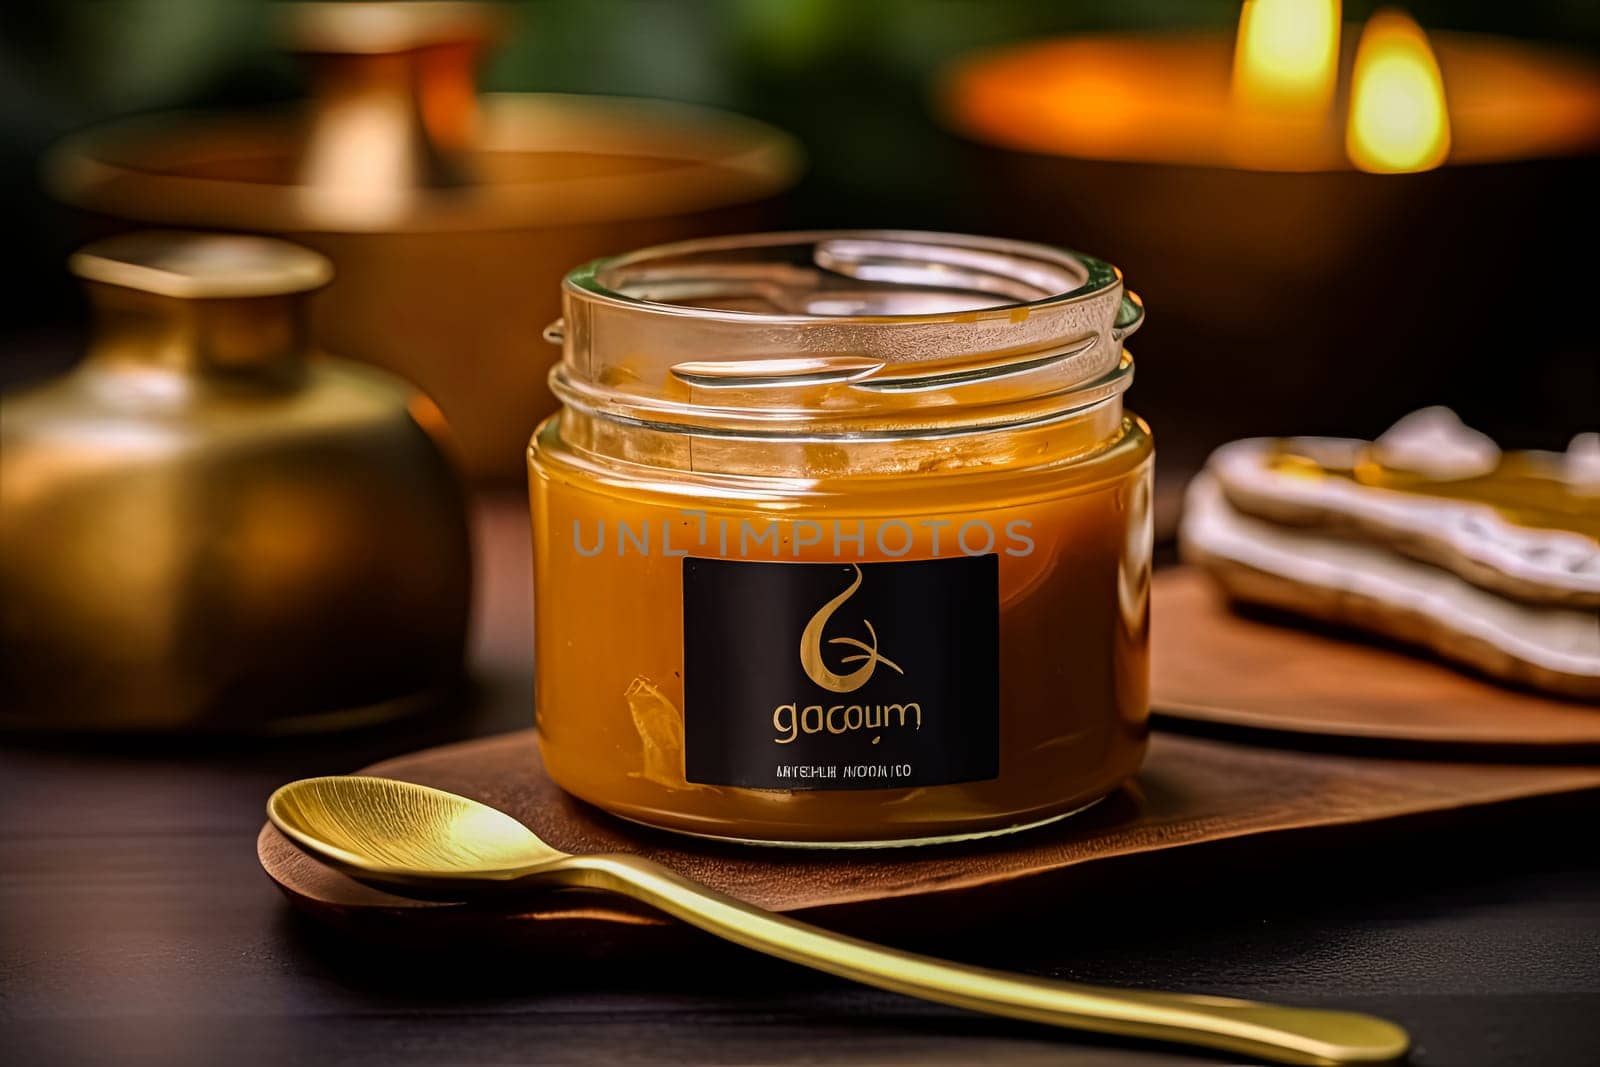 A jar of honey is sitting on a wooden table with a spoon next to it. The jar is labeled with the word "Goom" and has a gold spoon next to it. The scene has a warm and inviting atmosphere